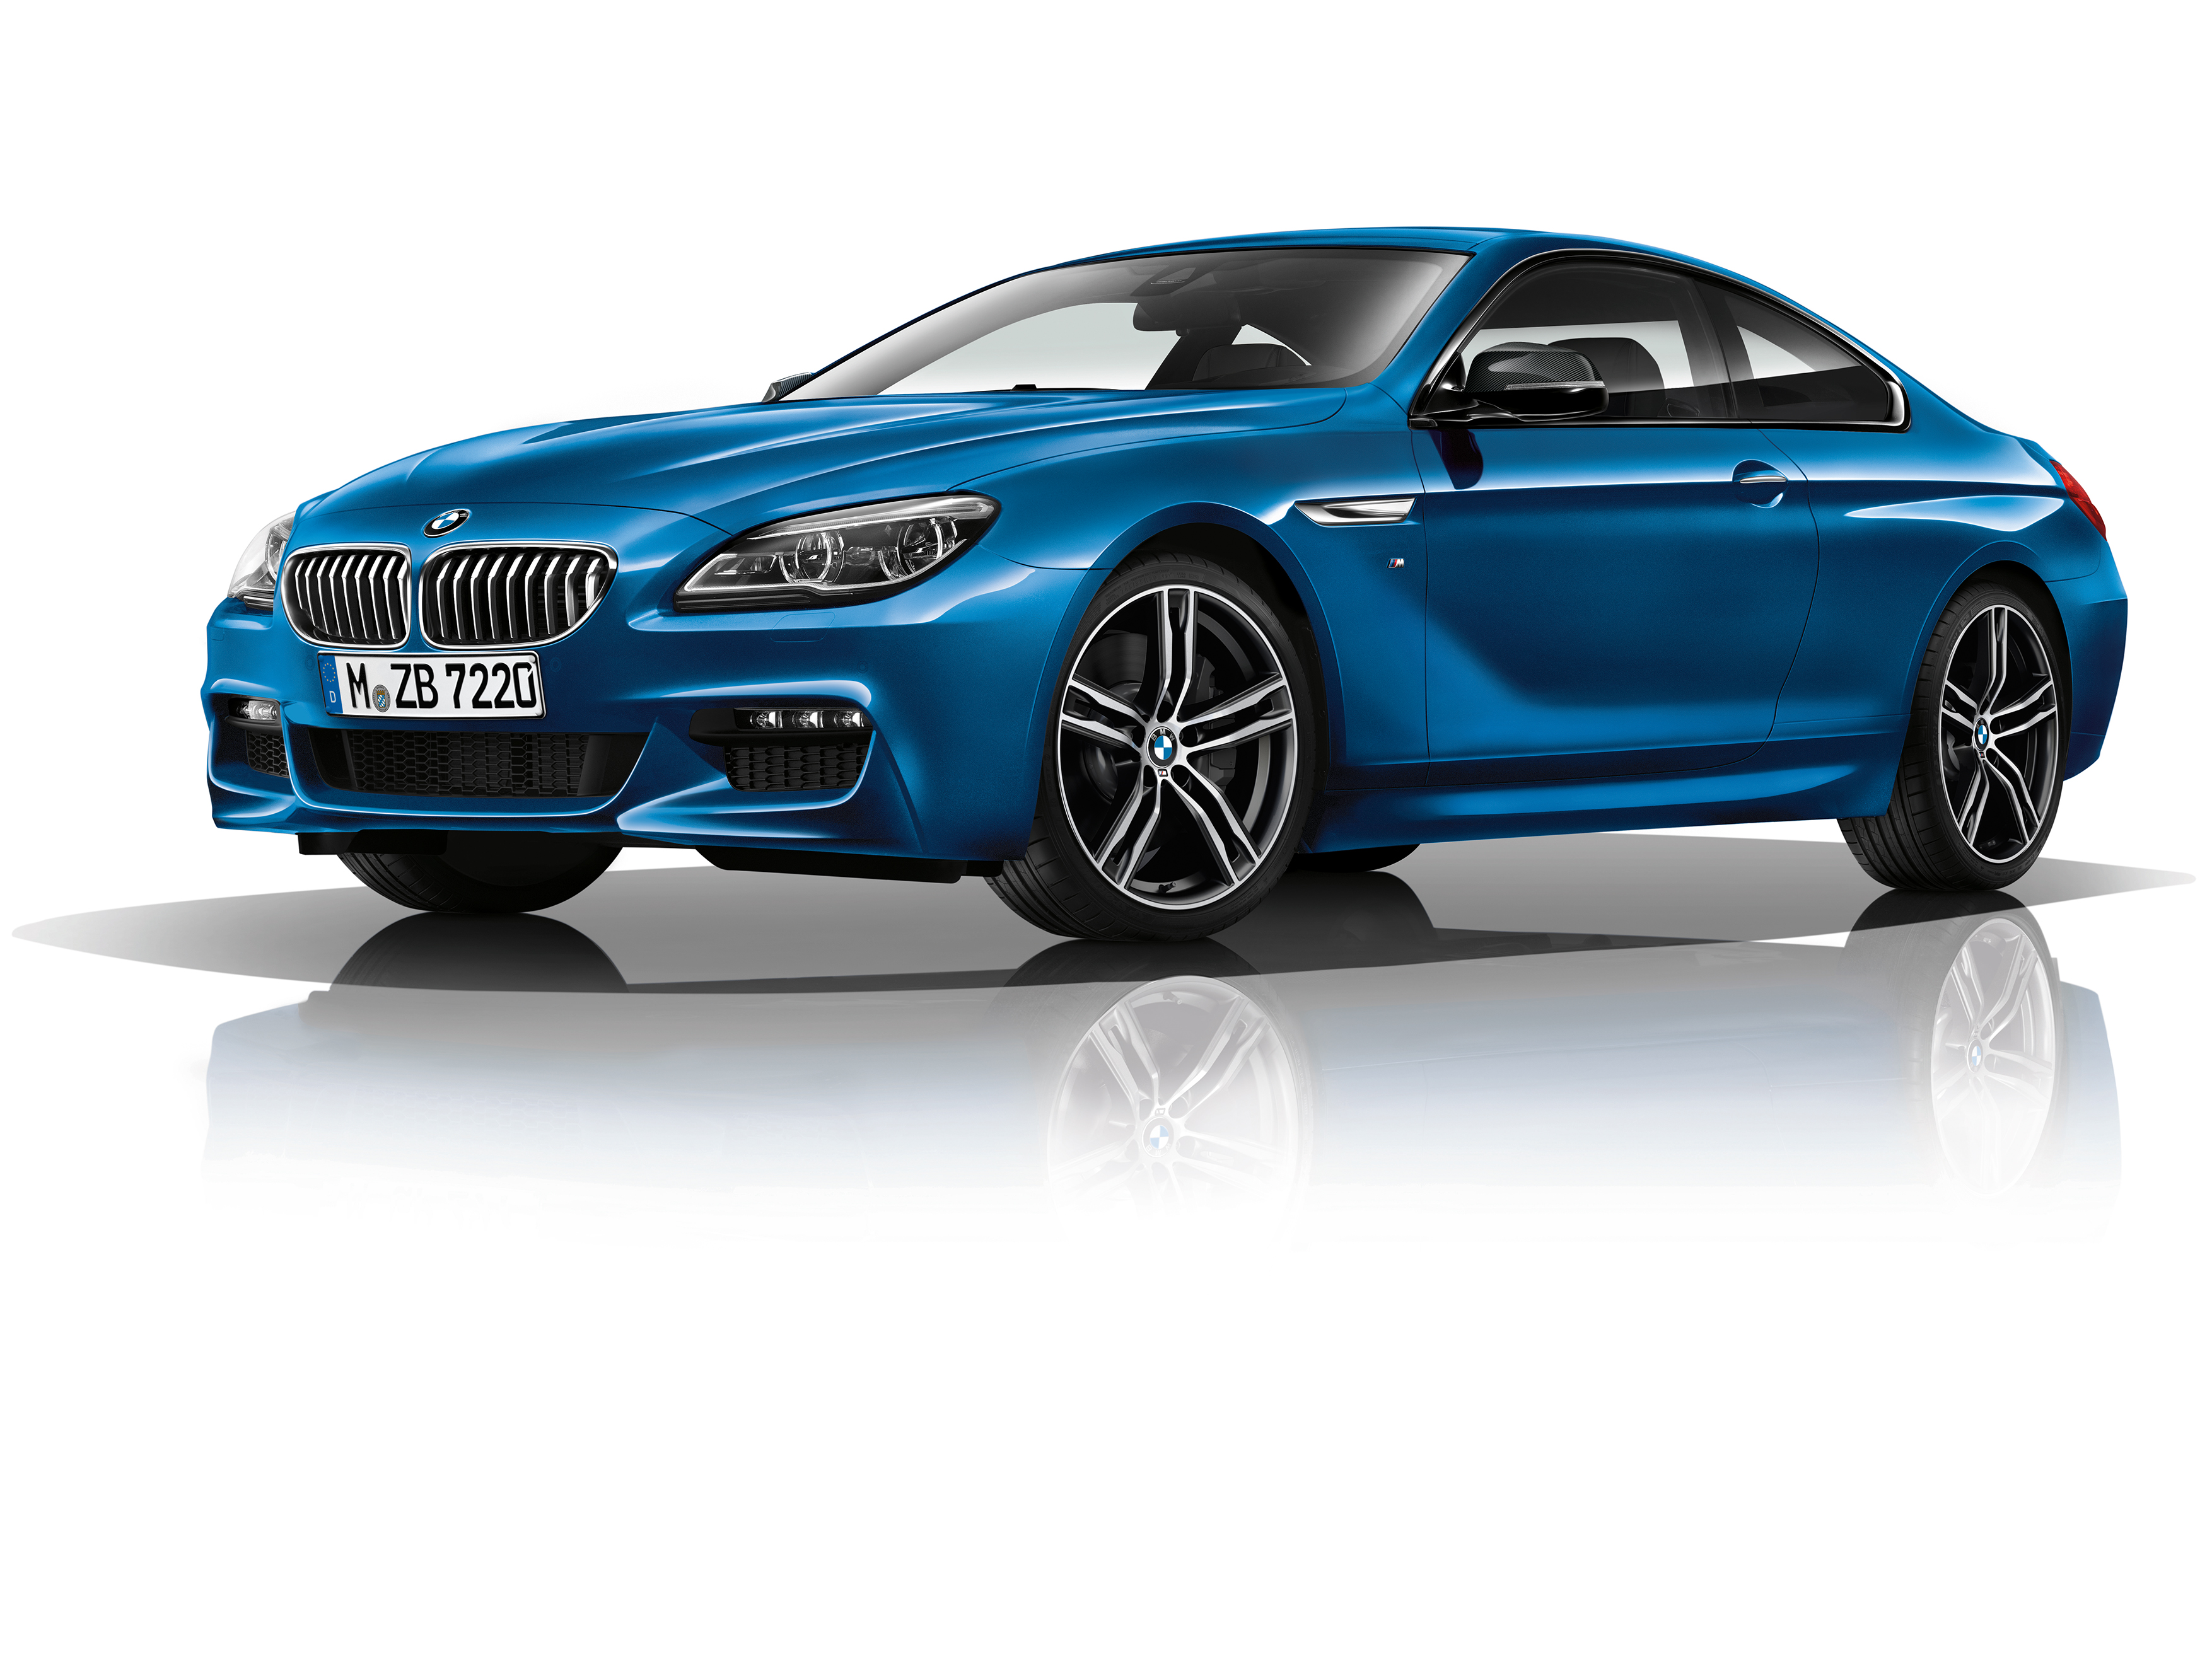 Bmw limited. BMW 6 Coupe 2017. BMW 6 Coupe 2018. BMW m6 Sport. БМВ 6 купе 2017.